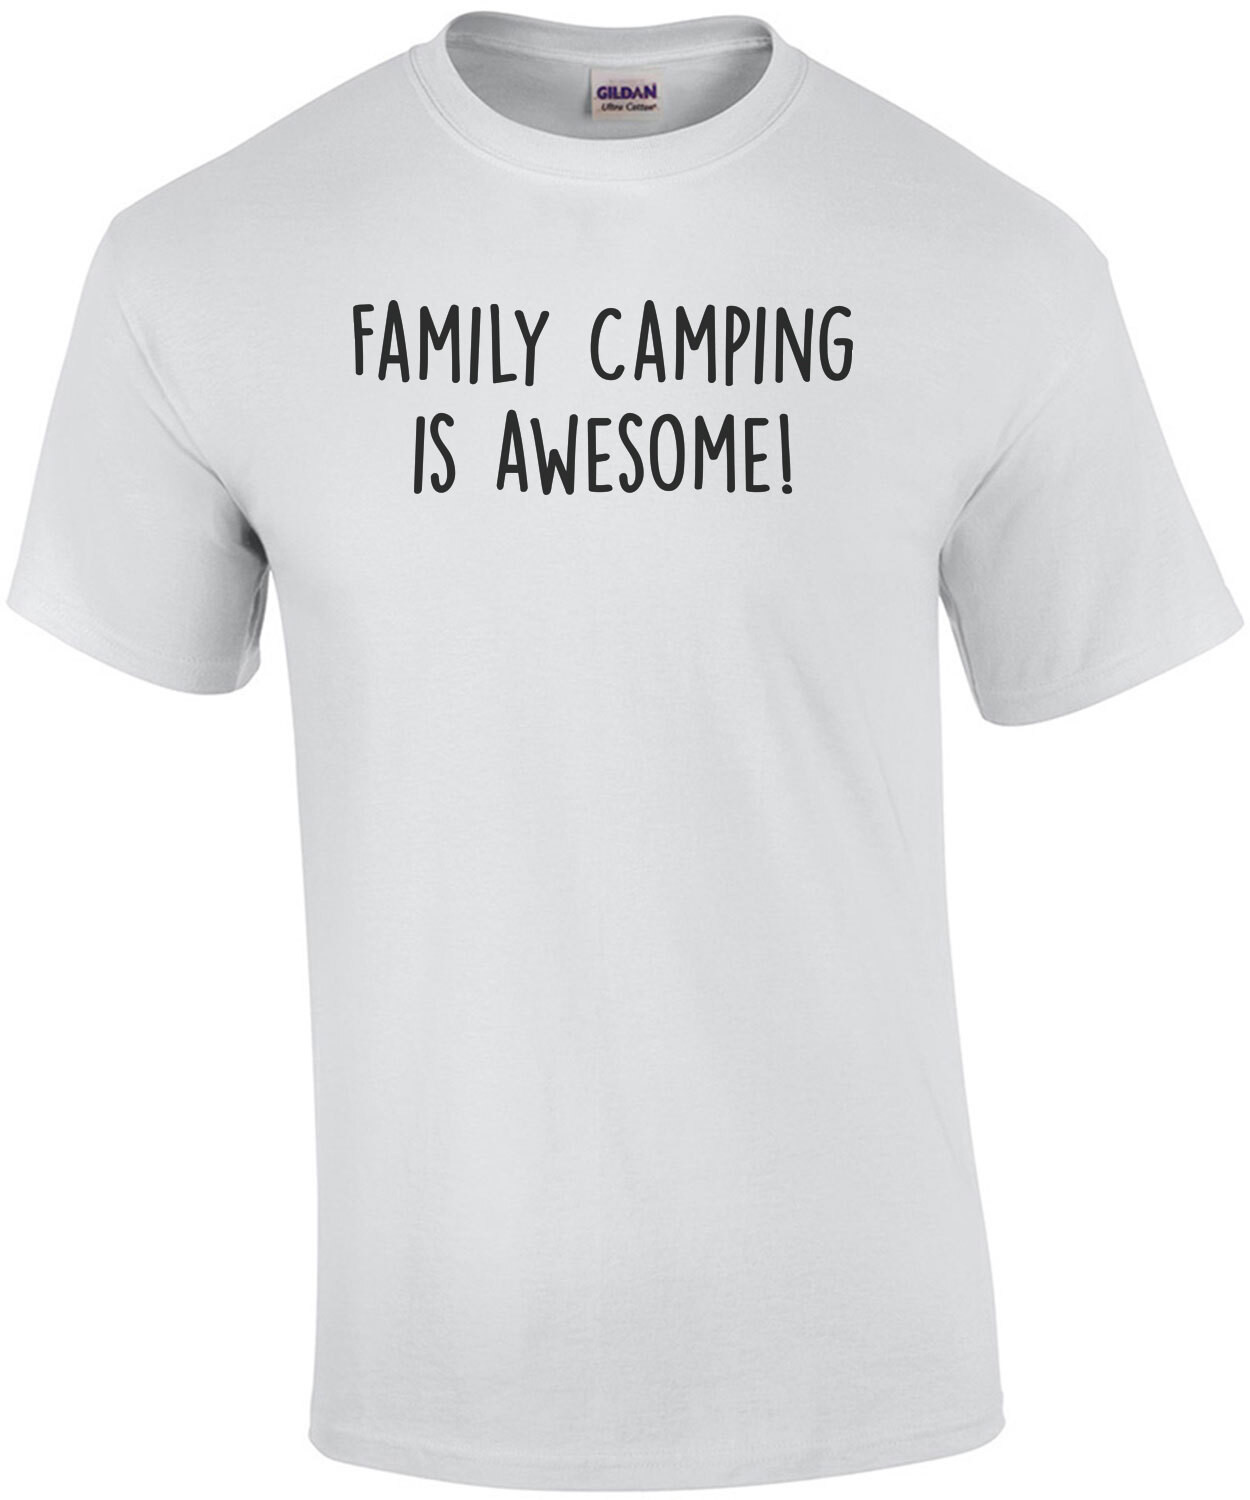 Family Camping Is Awesome - funny camping t-shirt